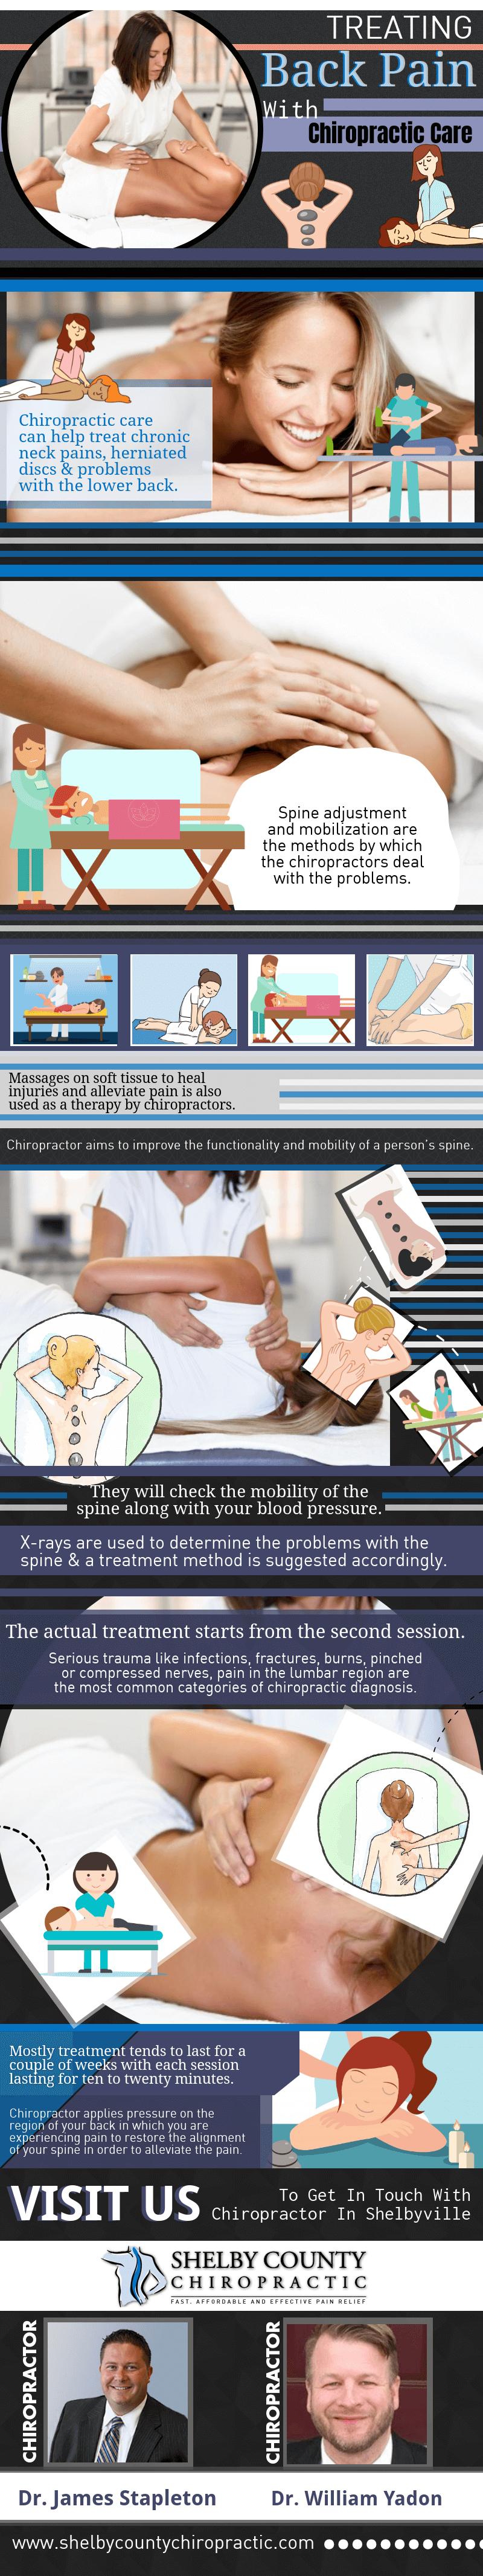 Treating Back Pain with Chiropractic Care